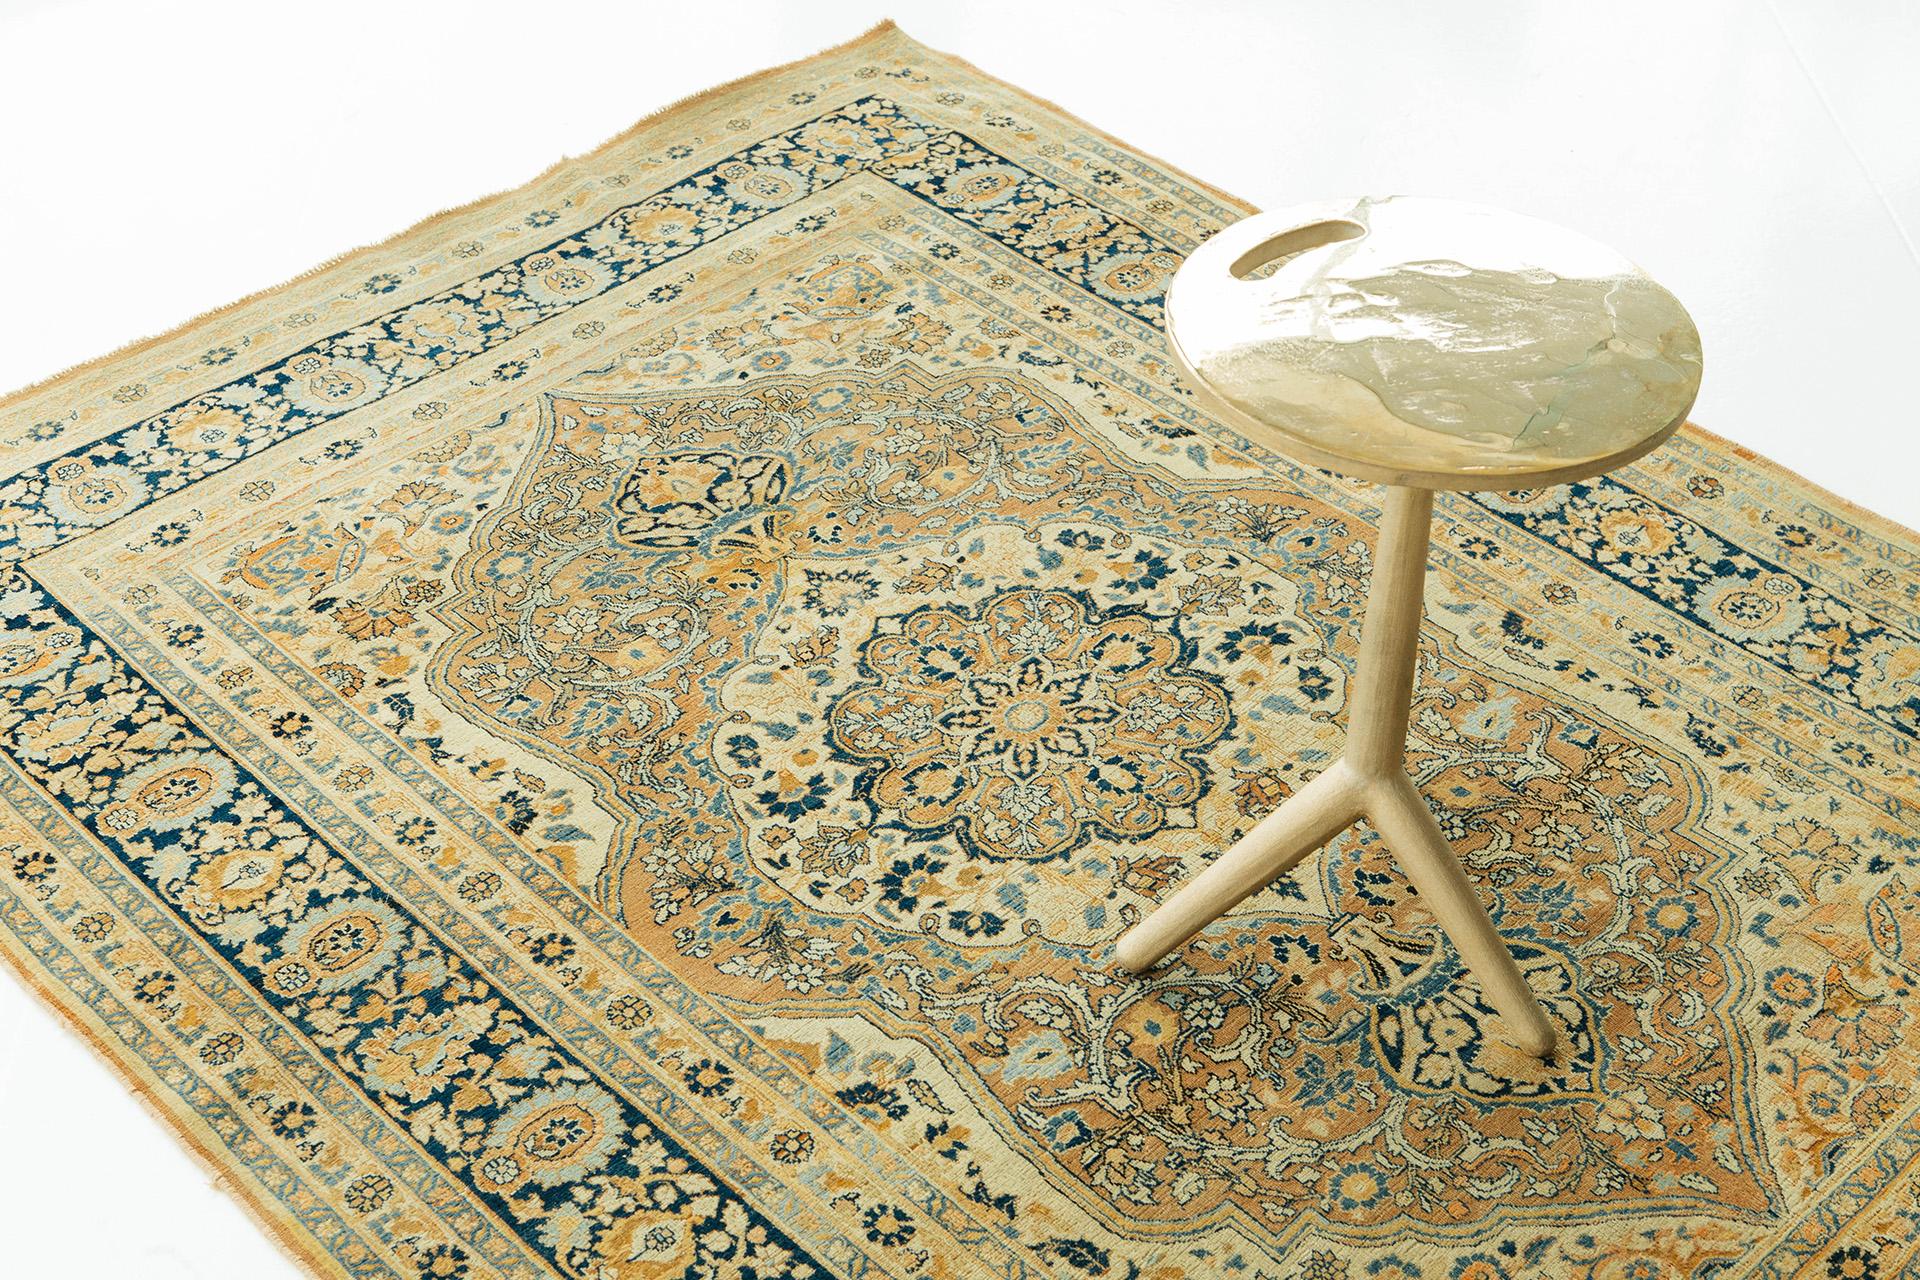 This sophisticated Persian rug from 1890 is from the region of Tabriz, a valuable city in ancient Iran. This golden masterpiece complements teal and natural hues perfectly. Adding this up to your collection will be a great fit in your guest's eyes.